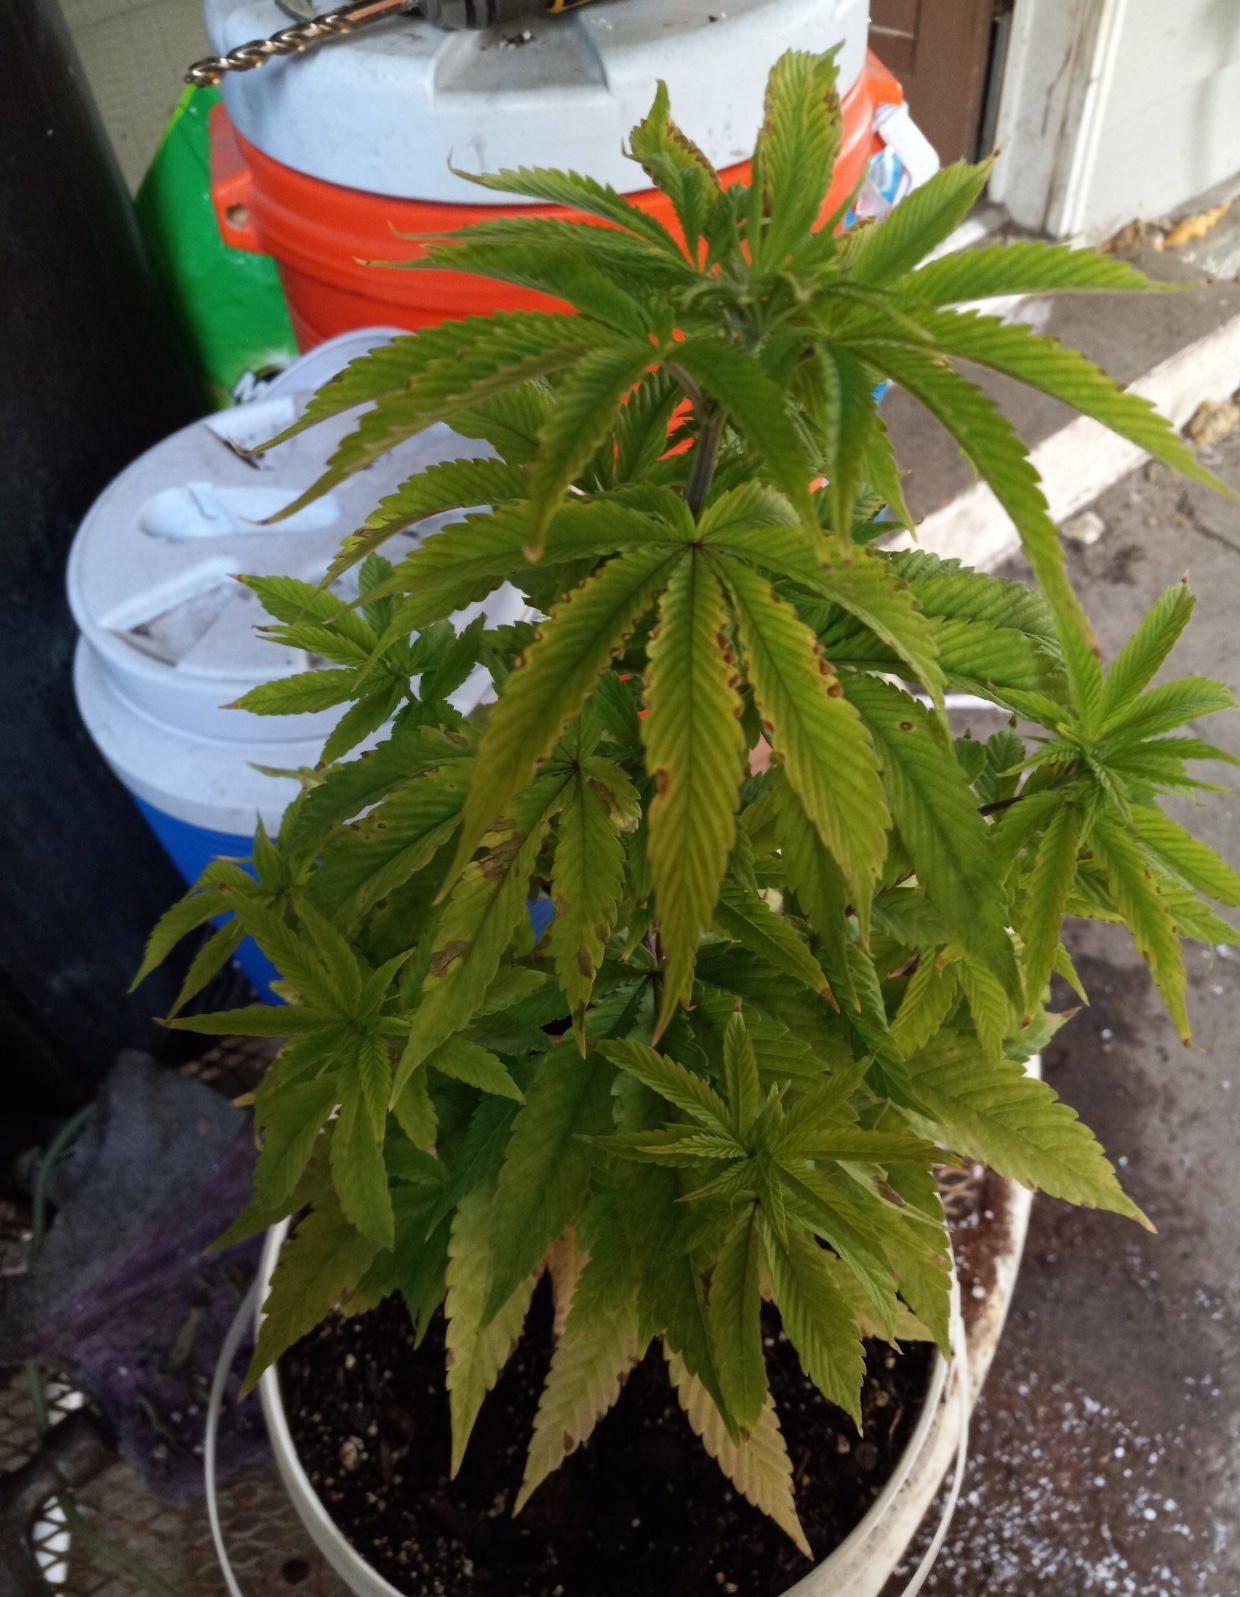 Major issues what kind of deficiency is this